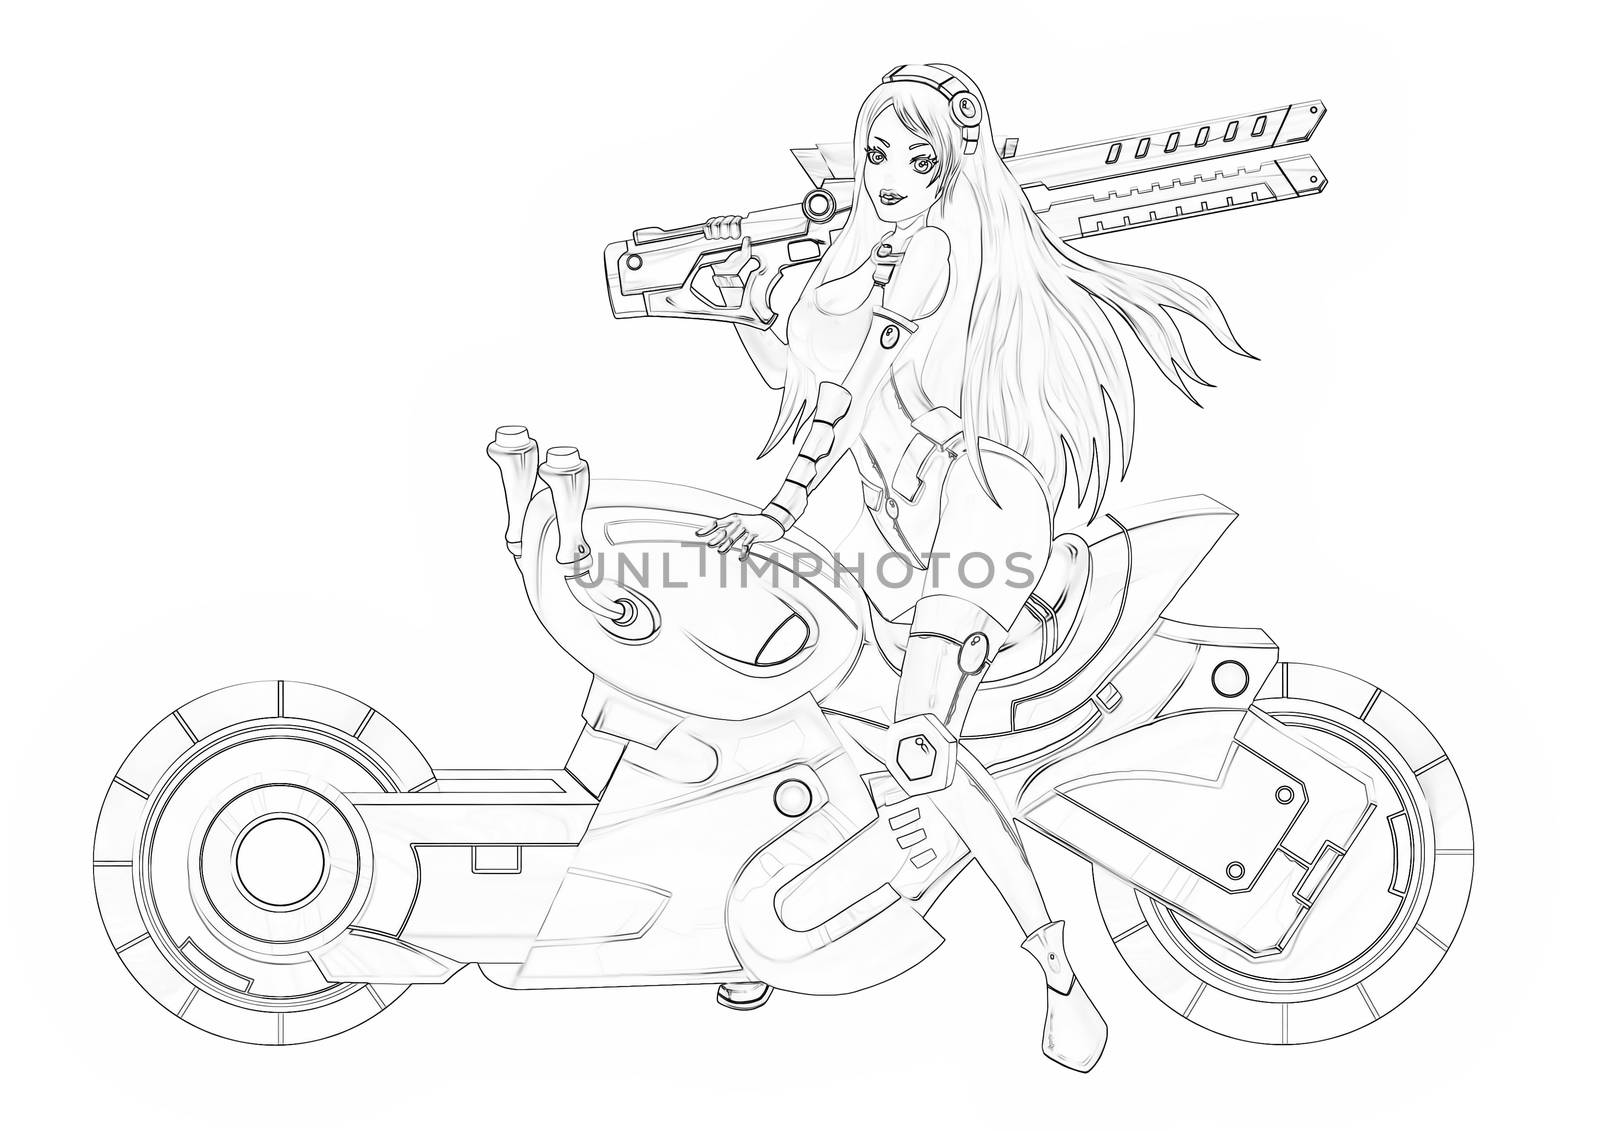 Illustration: Coloring Book Series: The Beautiful Bounty Hunter and Her Motorcycle. Soft thin line. Print it and bring it to Life with Color! Fantastic Outline / Sketch / Line Art Design.